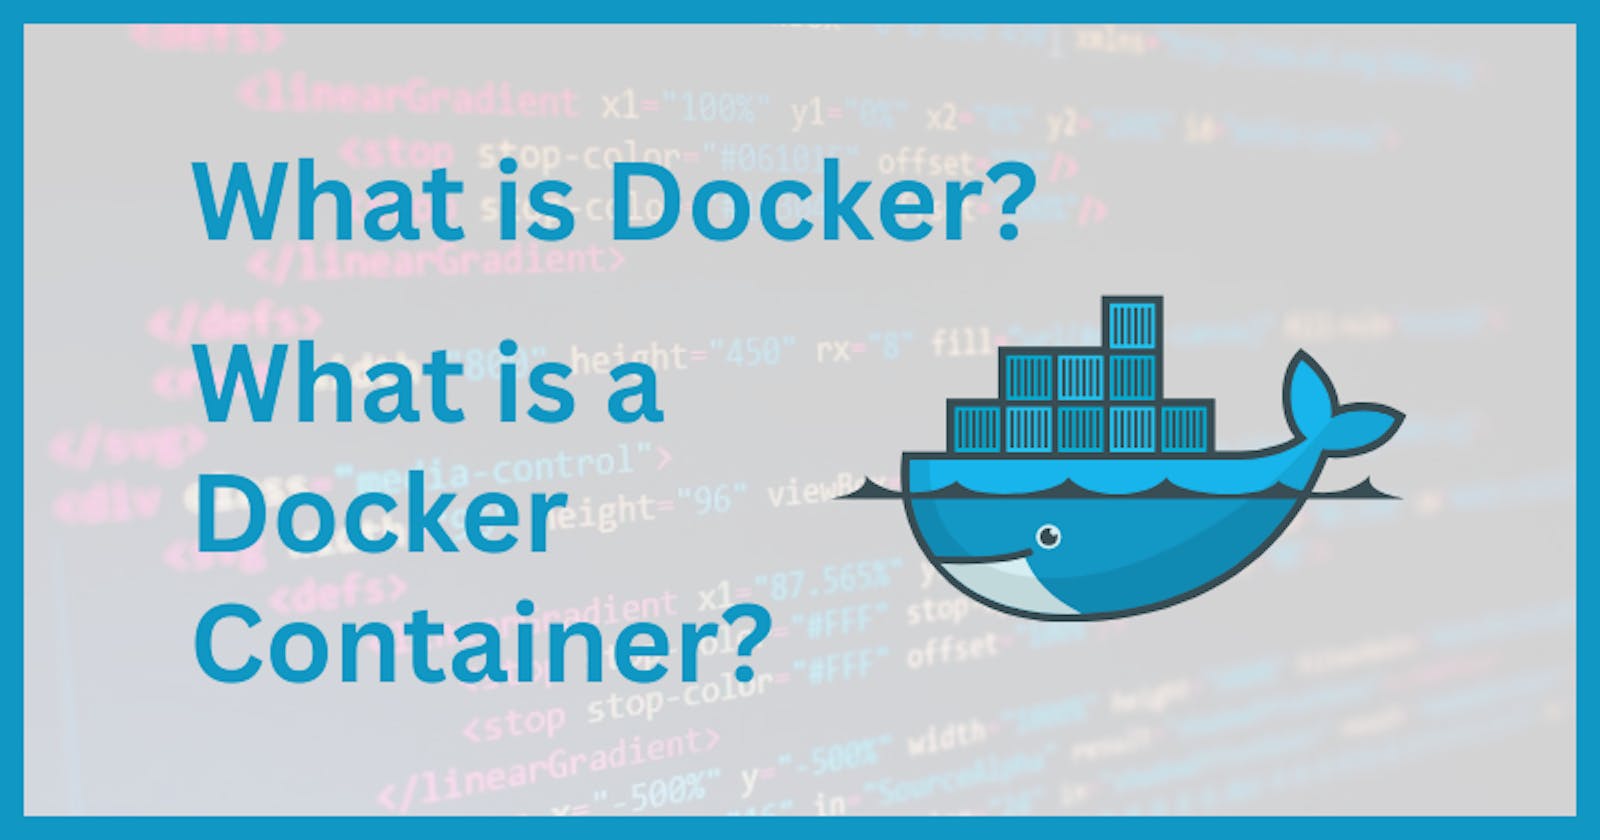 What is Docker? What are Containers?